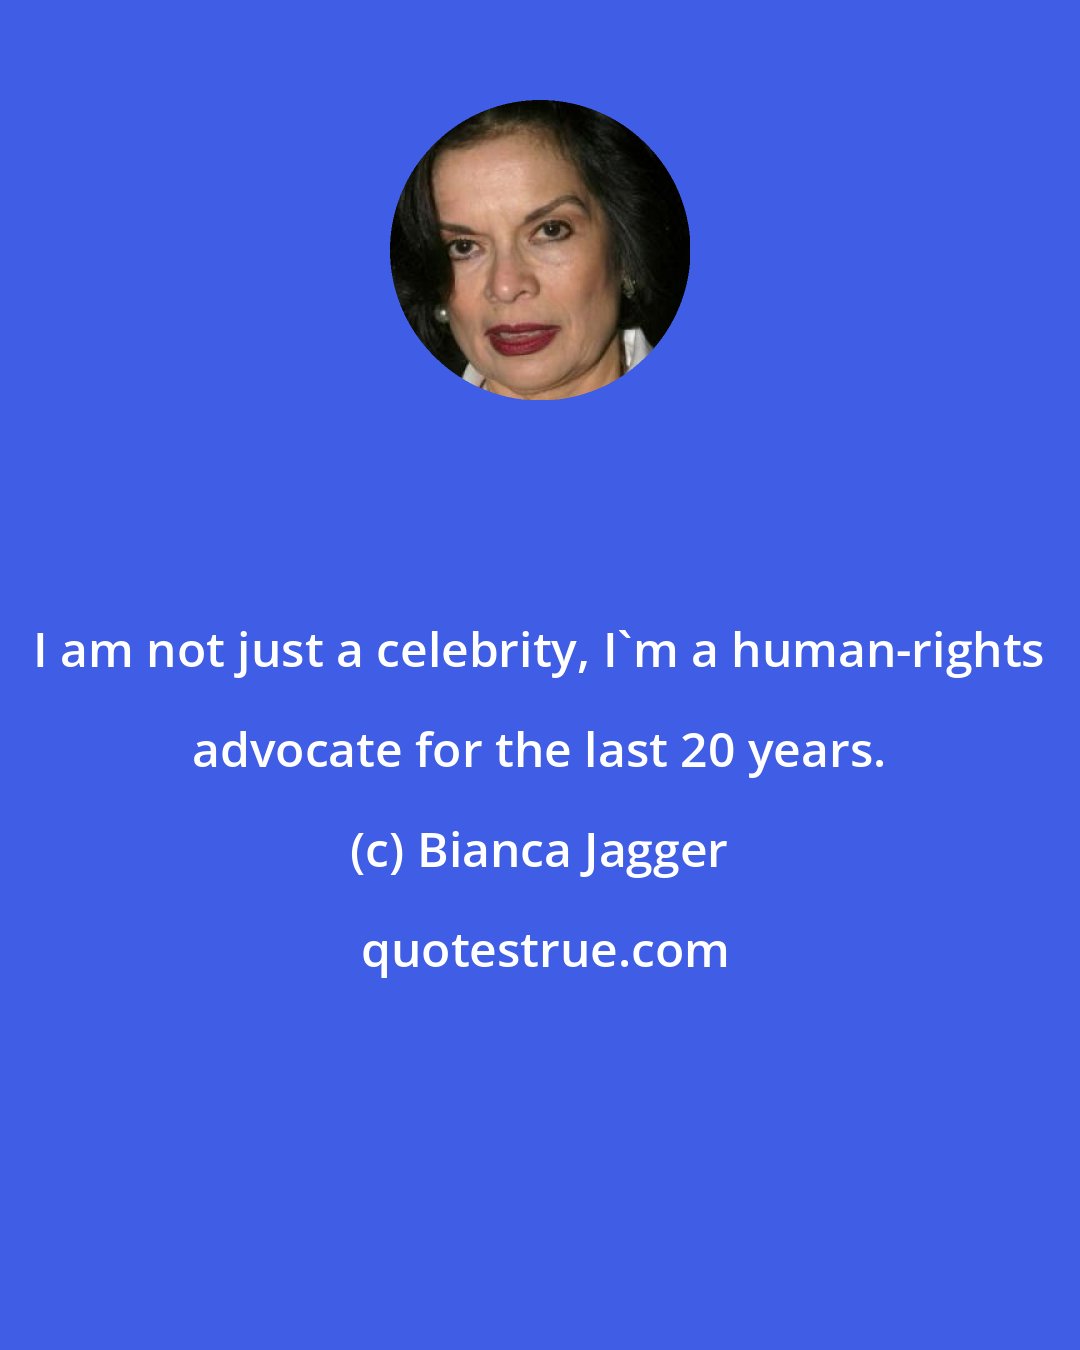 Bianca Jagger: I am not just a celebrity, I'm a human-rights advocate for the last 20 years.